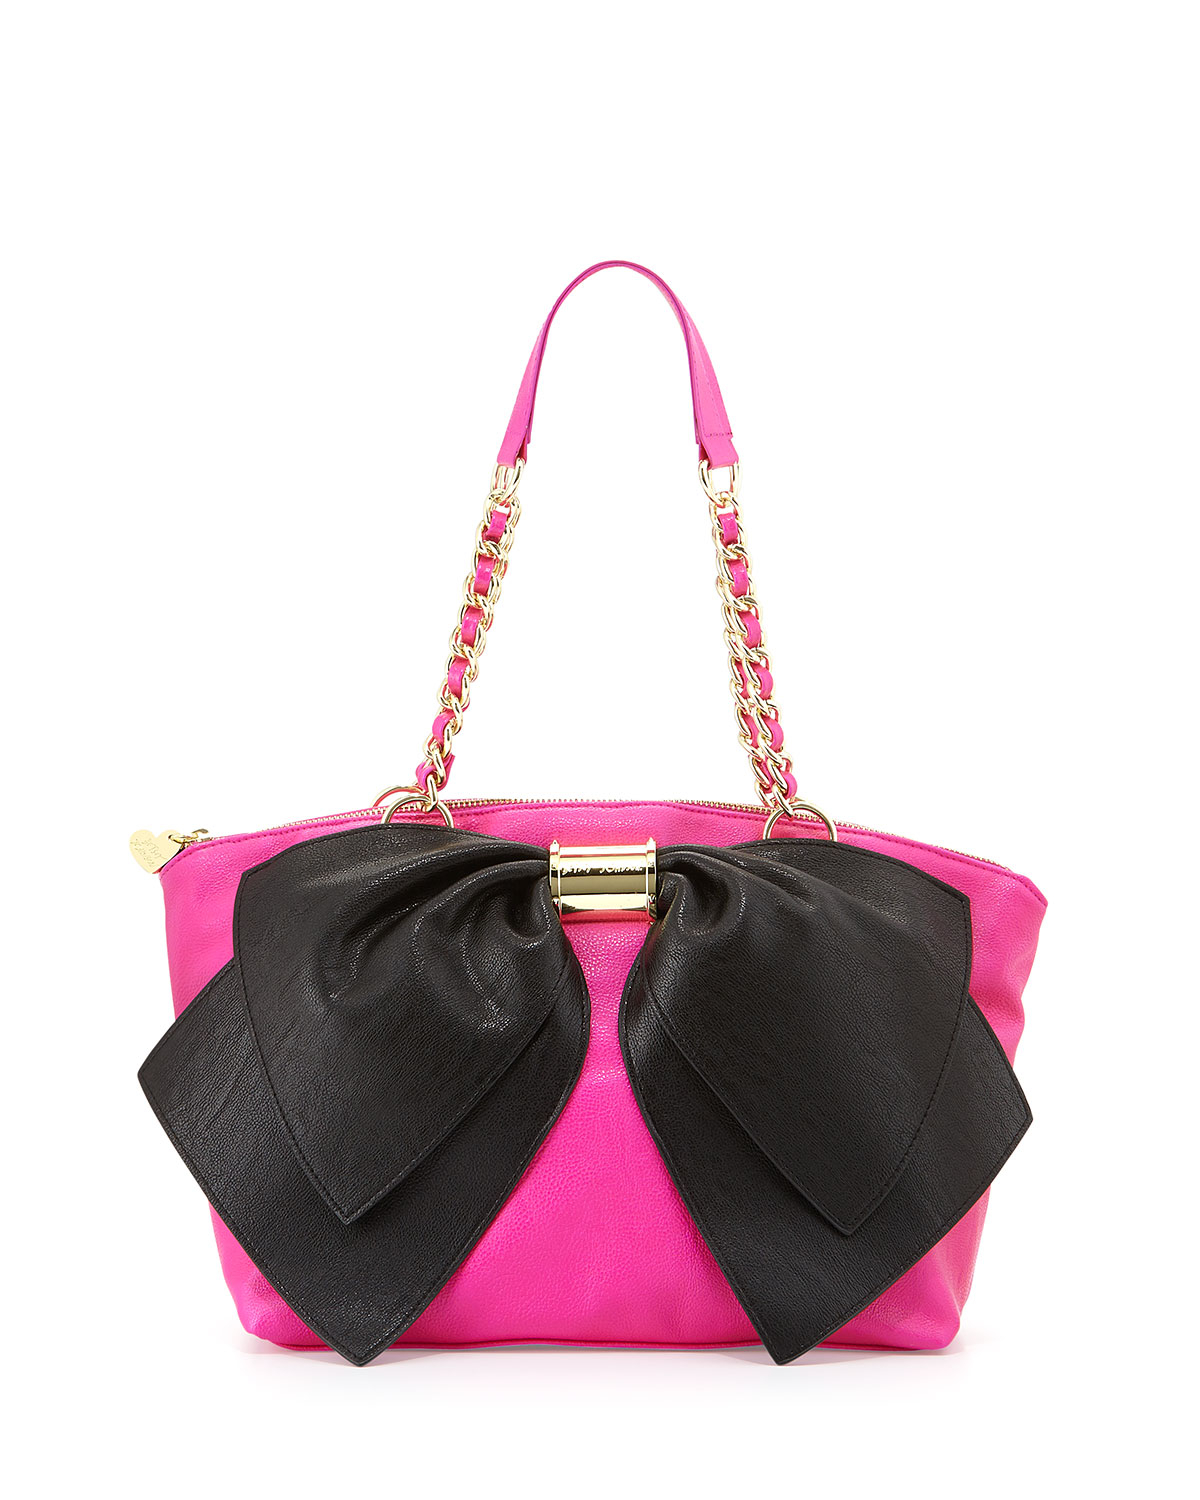 Betsey johnson Nanza Twotone Bow Satchel in Pink | Lyst